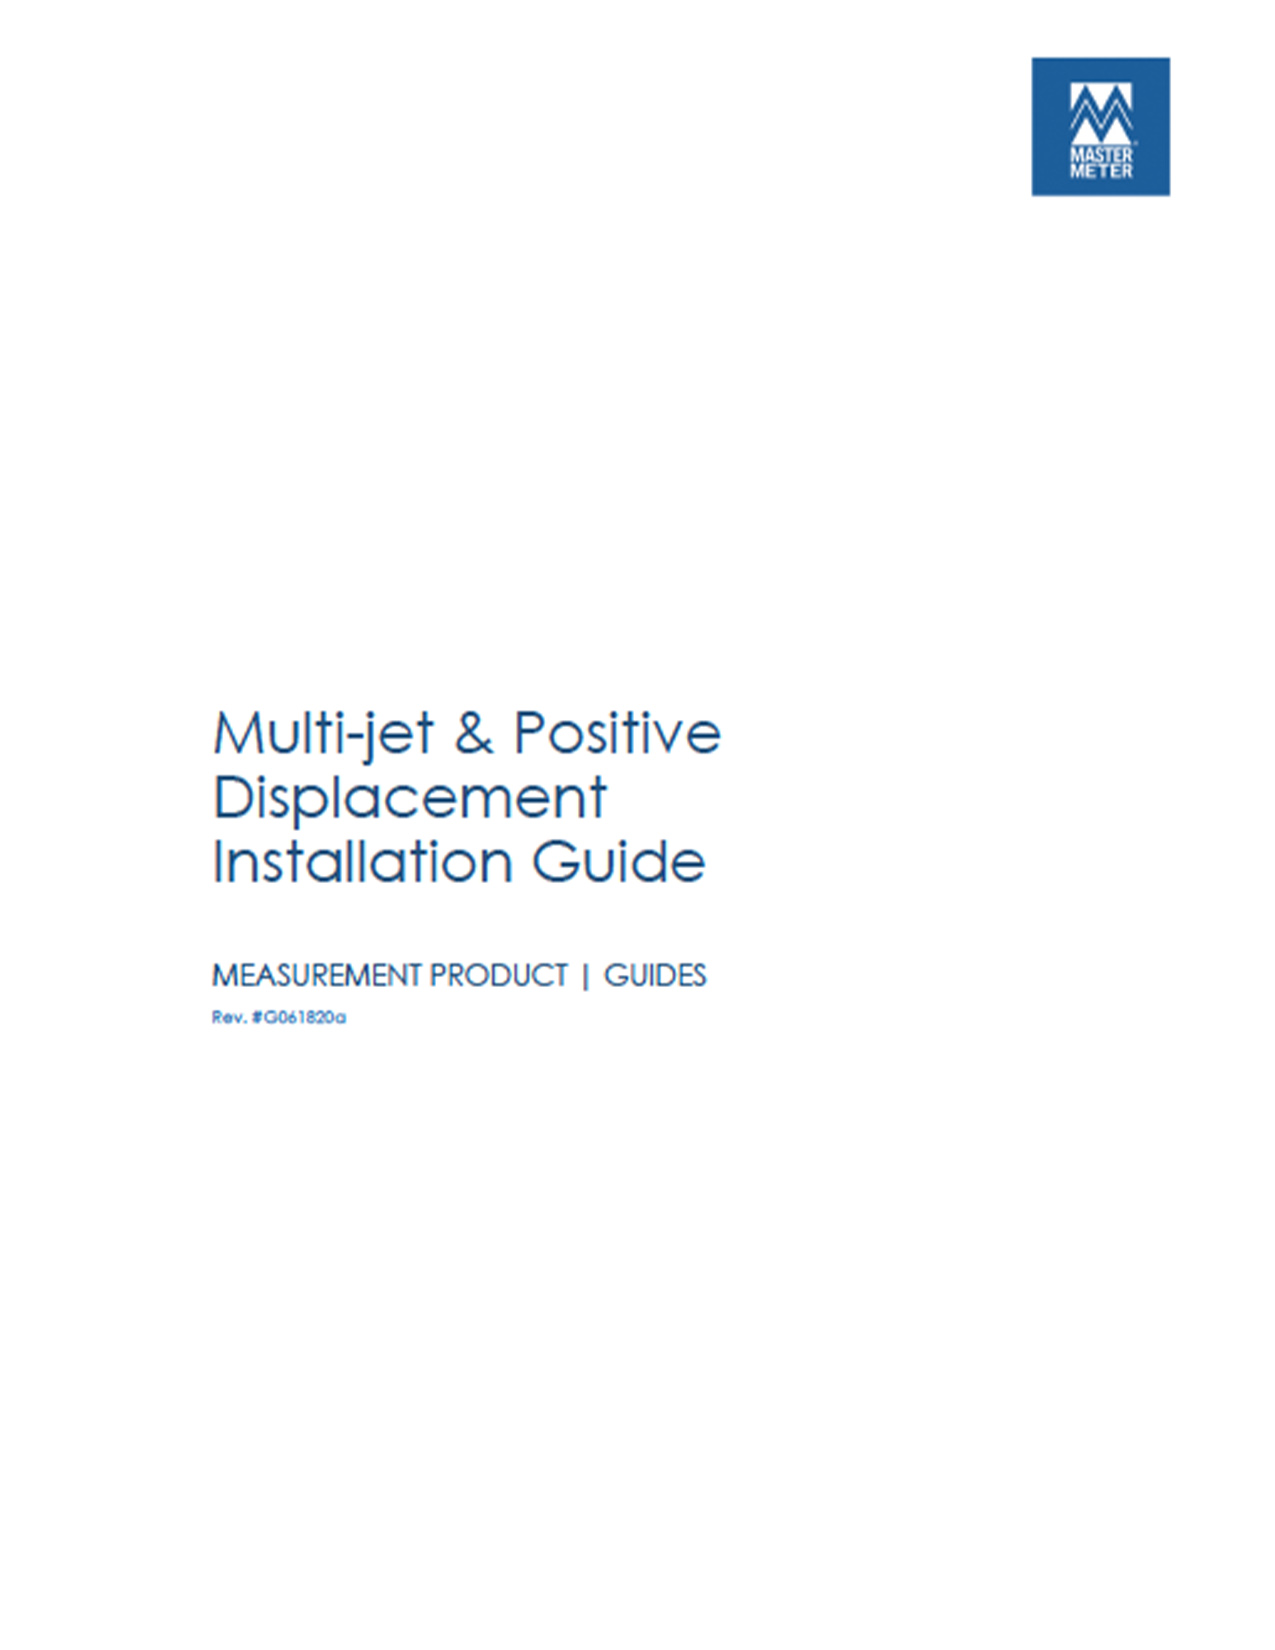 Multi-Jet and Positive Displacement Meter Installation Guide